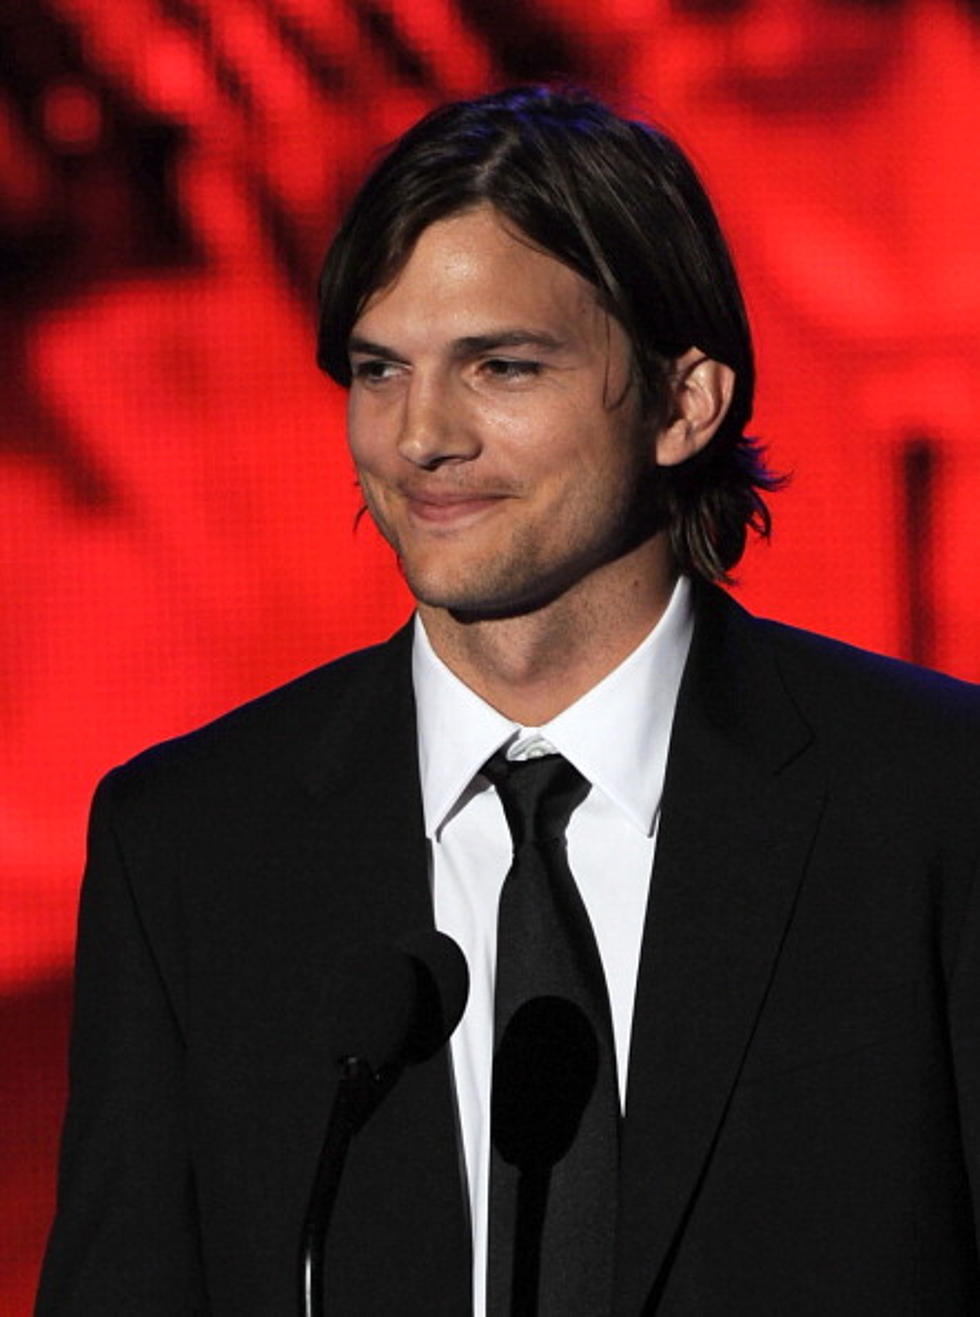 Ashton Kutcher Replacing Charlie Sheen on ‘Two and a Half Men’